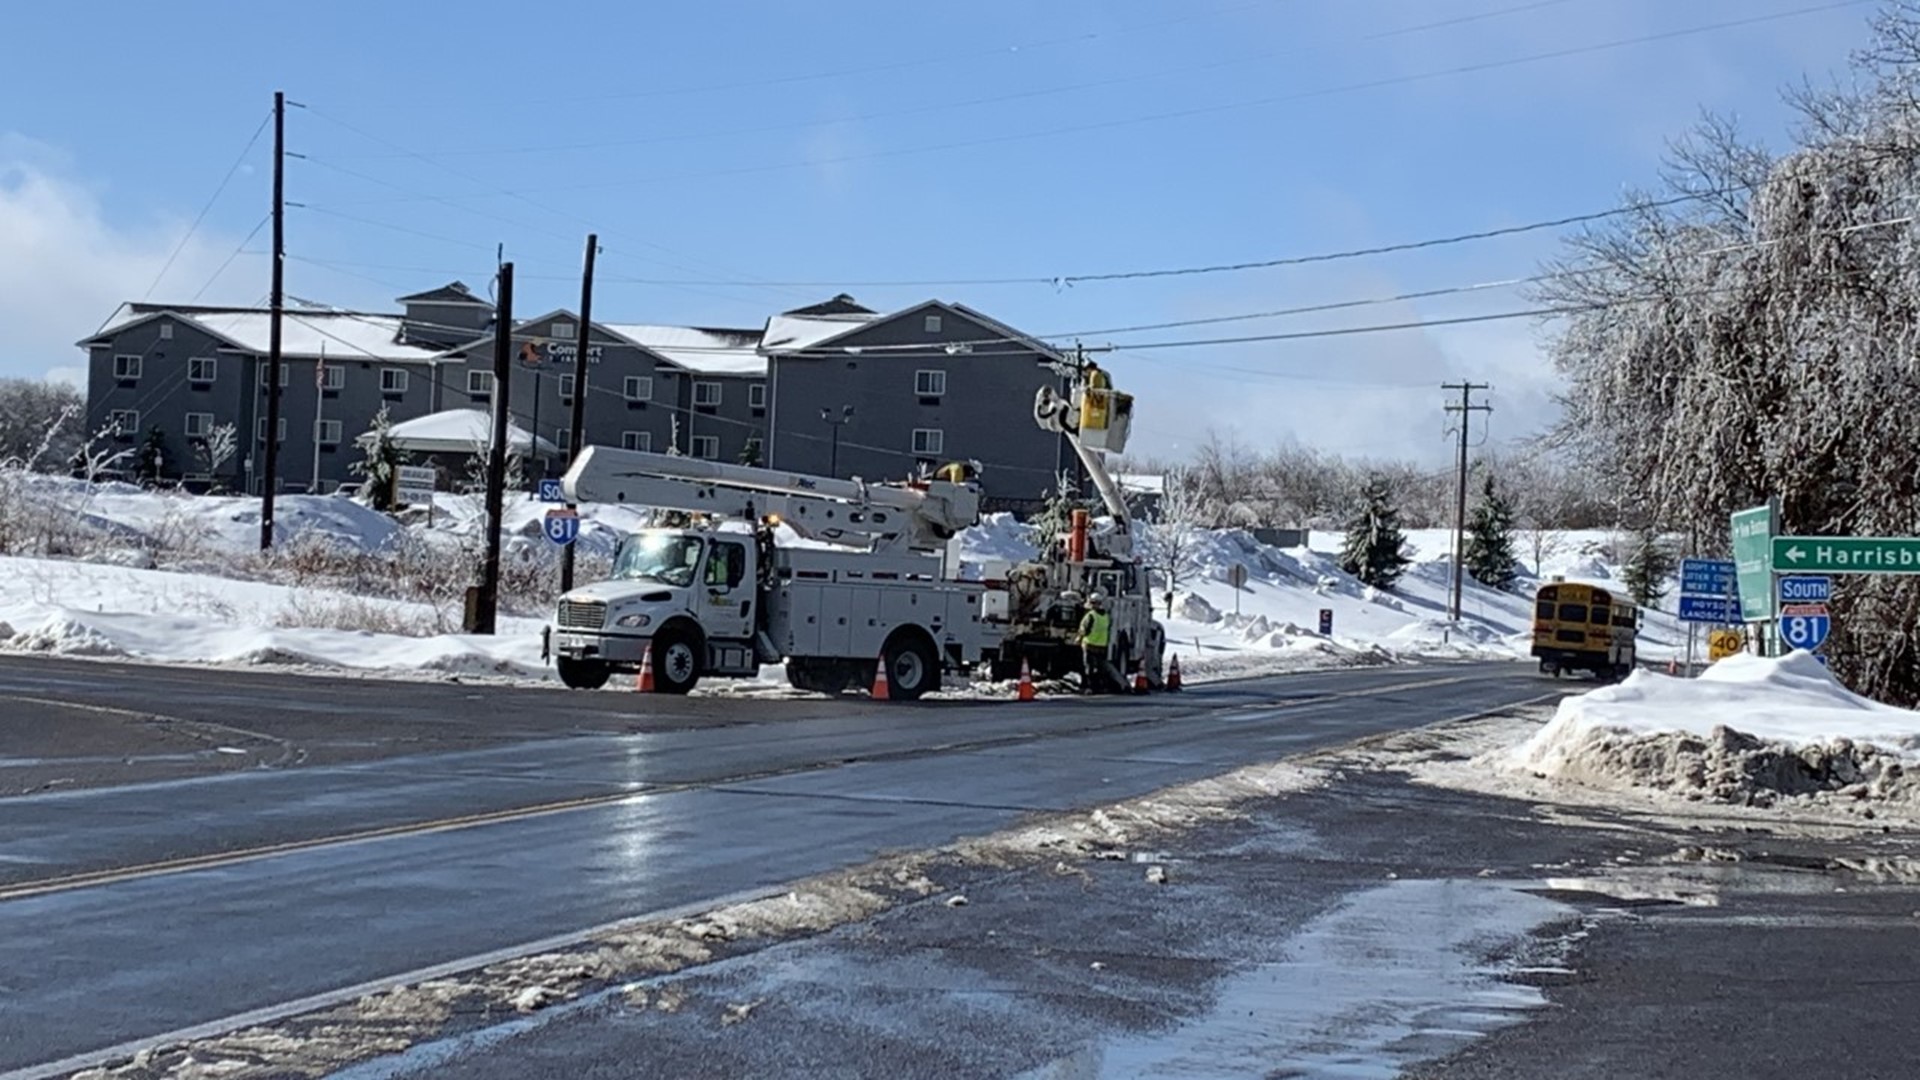 Ice on power lines has caused some outages throughout our area.